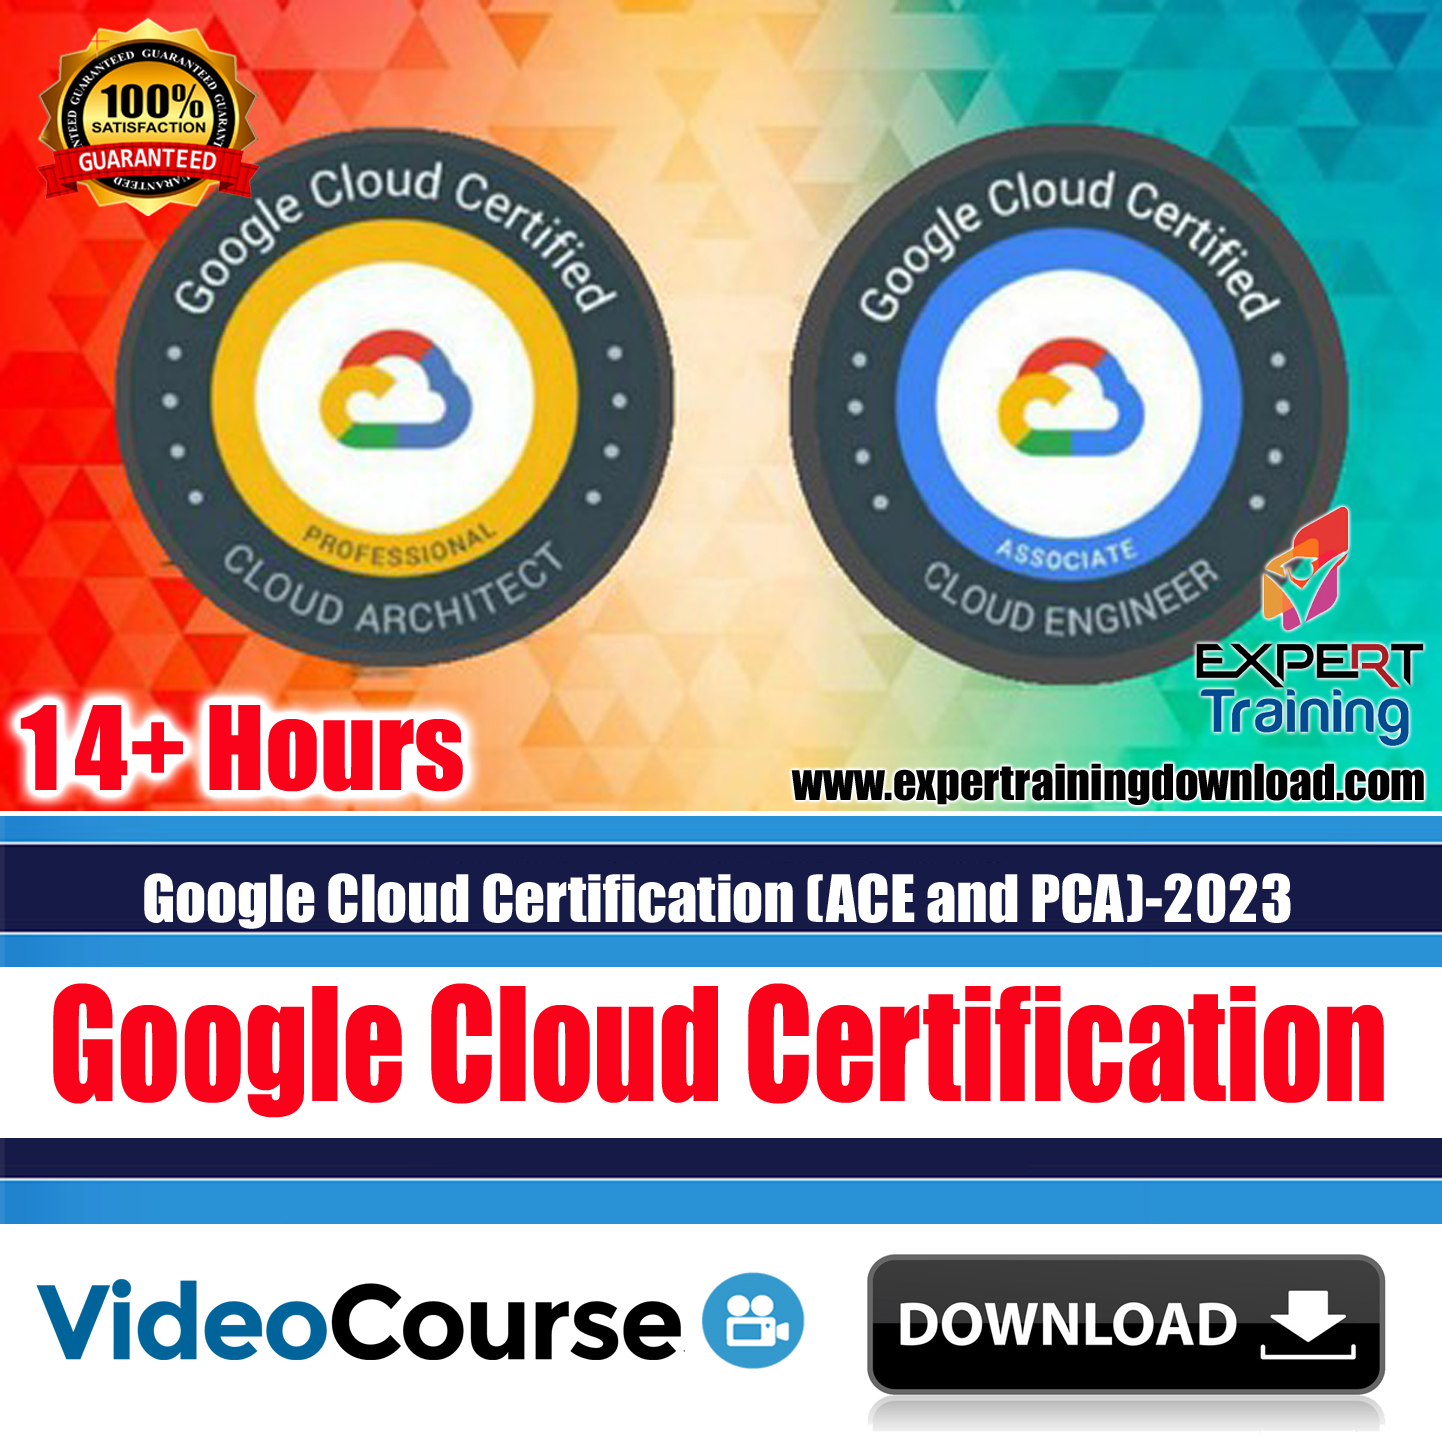 Google Cloud Certification (ACE and PCA)-2023